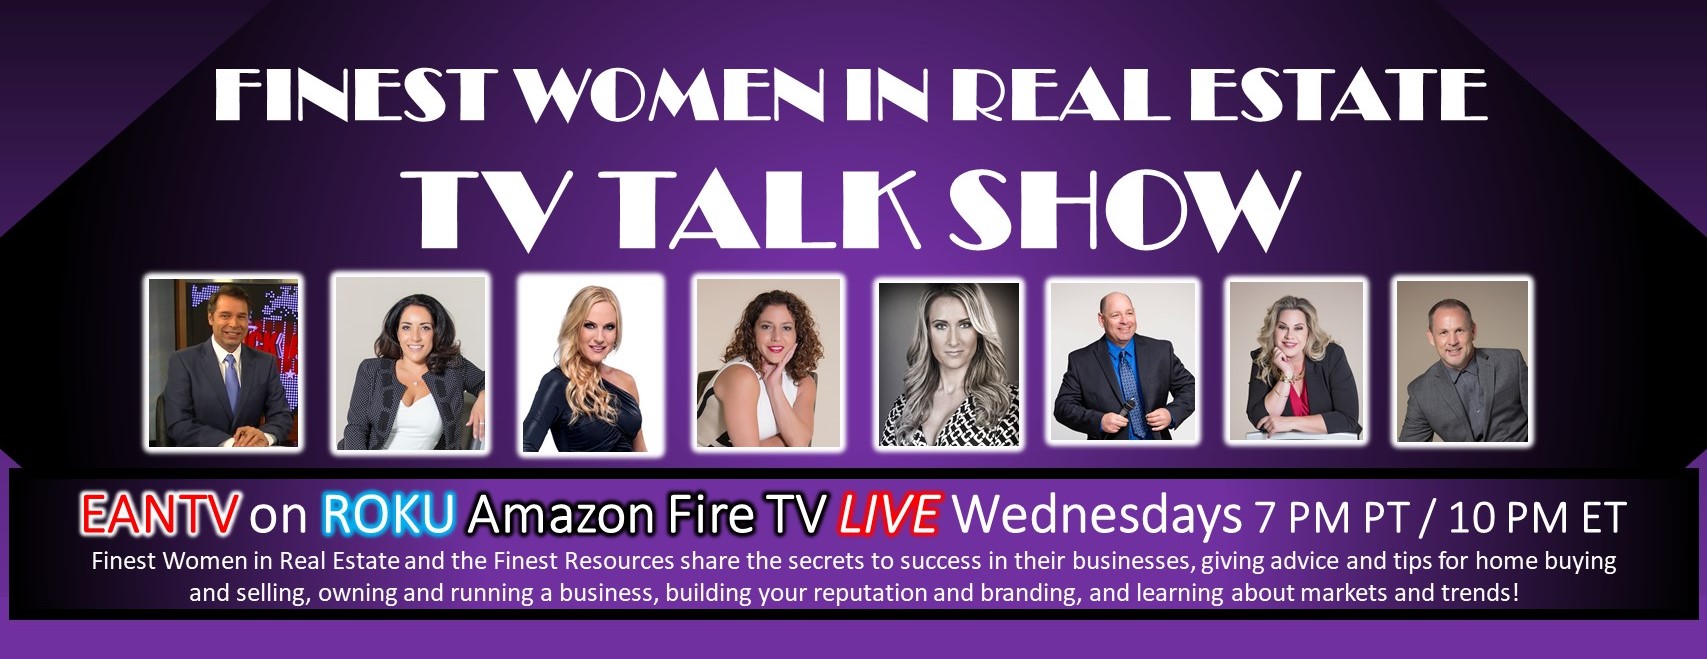 Finest Women in Real Estate National TV Talk Show